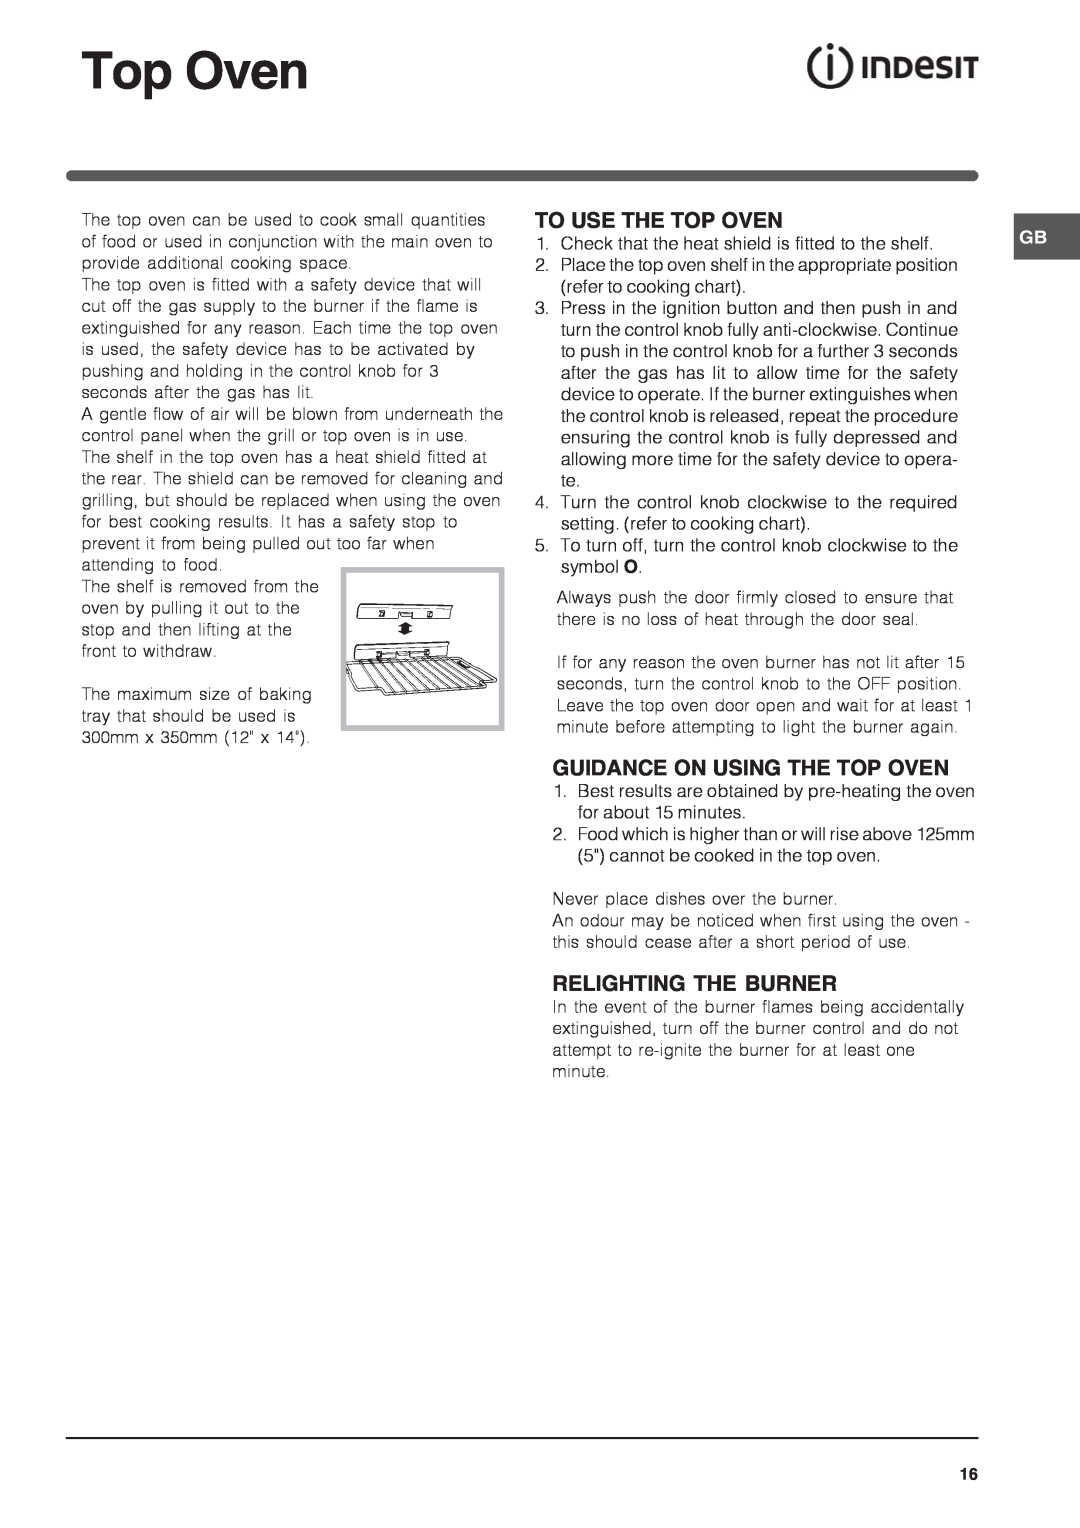 Indesit ID60G2 operating instructions To Use The Top Oven, Guidance On Using The Top Oven, Relighting The Burner 